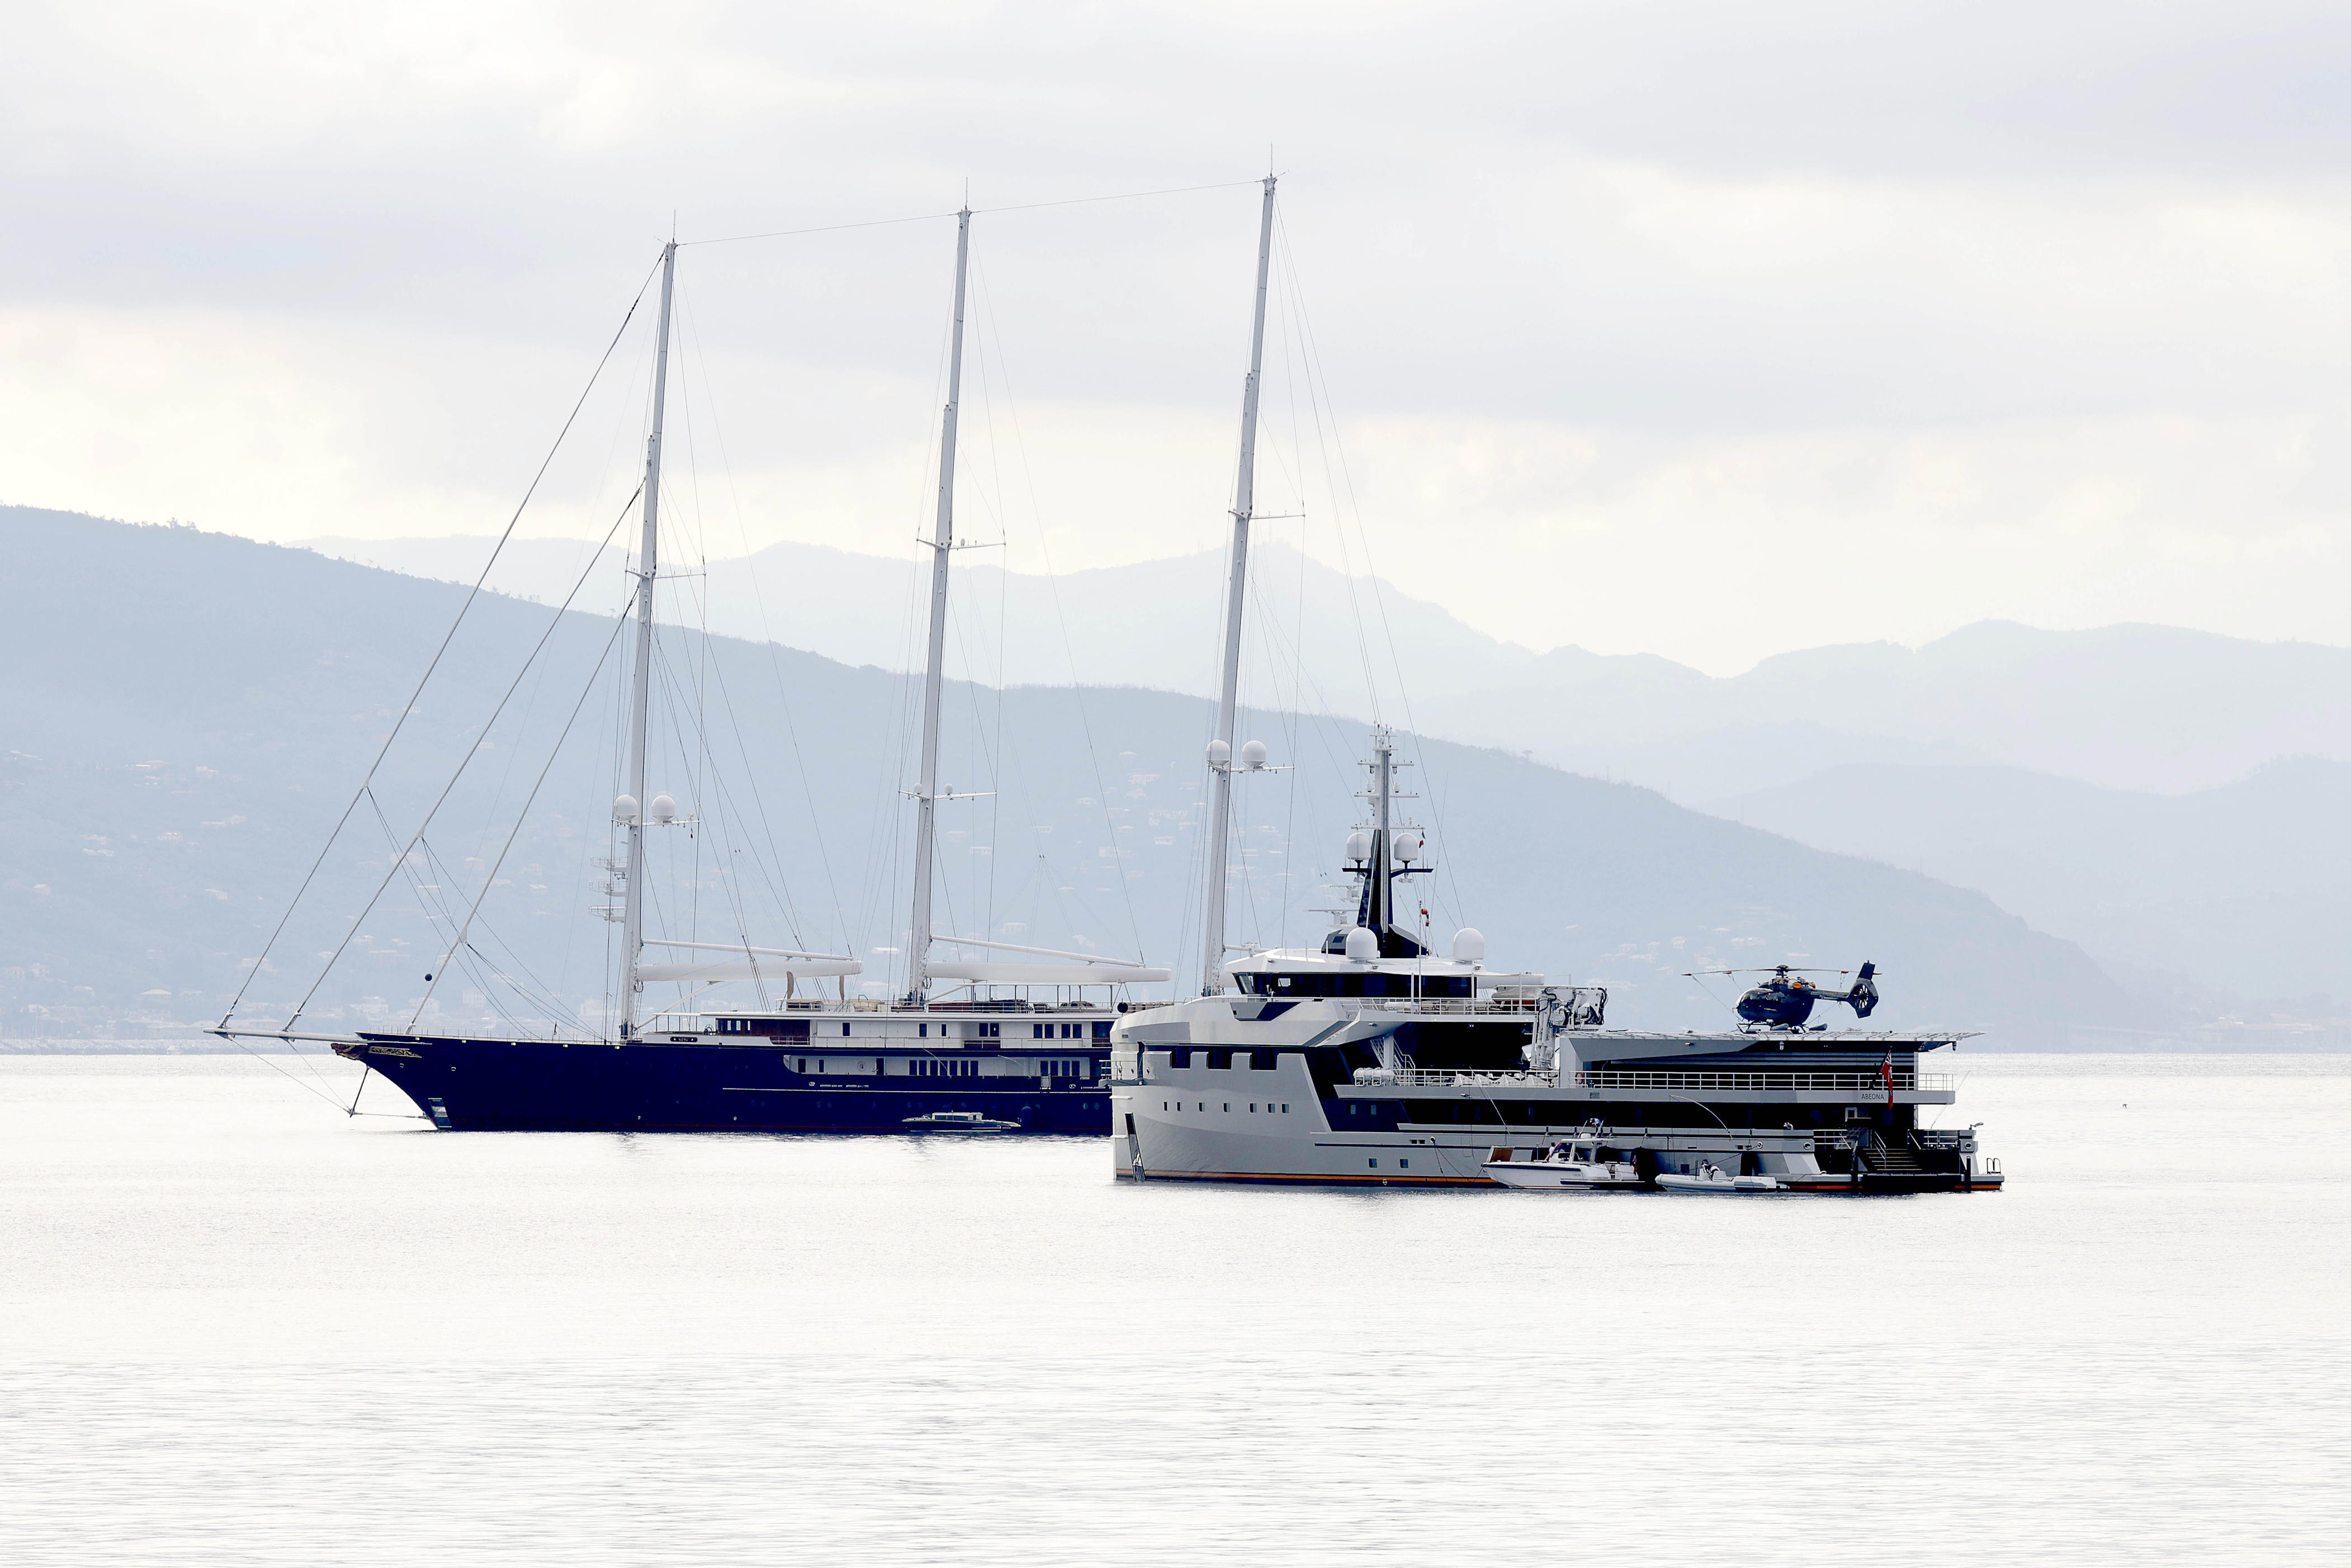 Jeff Bezos' fiancée, Lauren Sanchez, says she wasn't the inspiration for the figurehead of a woman on the Amazon founder's yacht, Koru, seen at left, with its support vessel, Abeona, seen at right. <a>Robino Salvatore/GC Images</a>